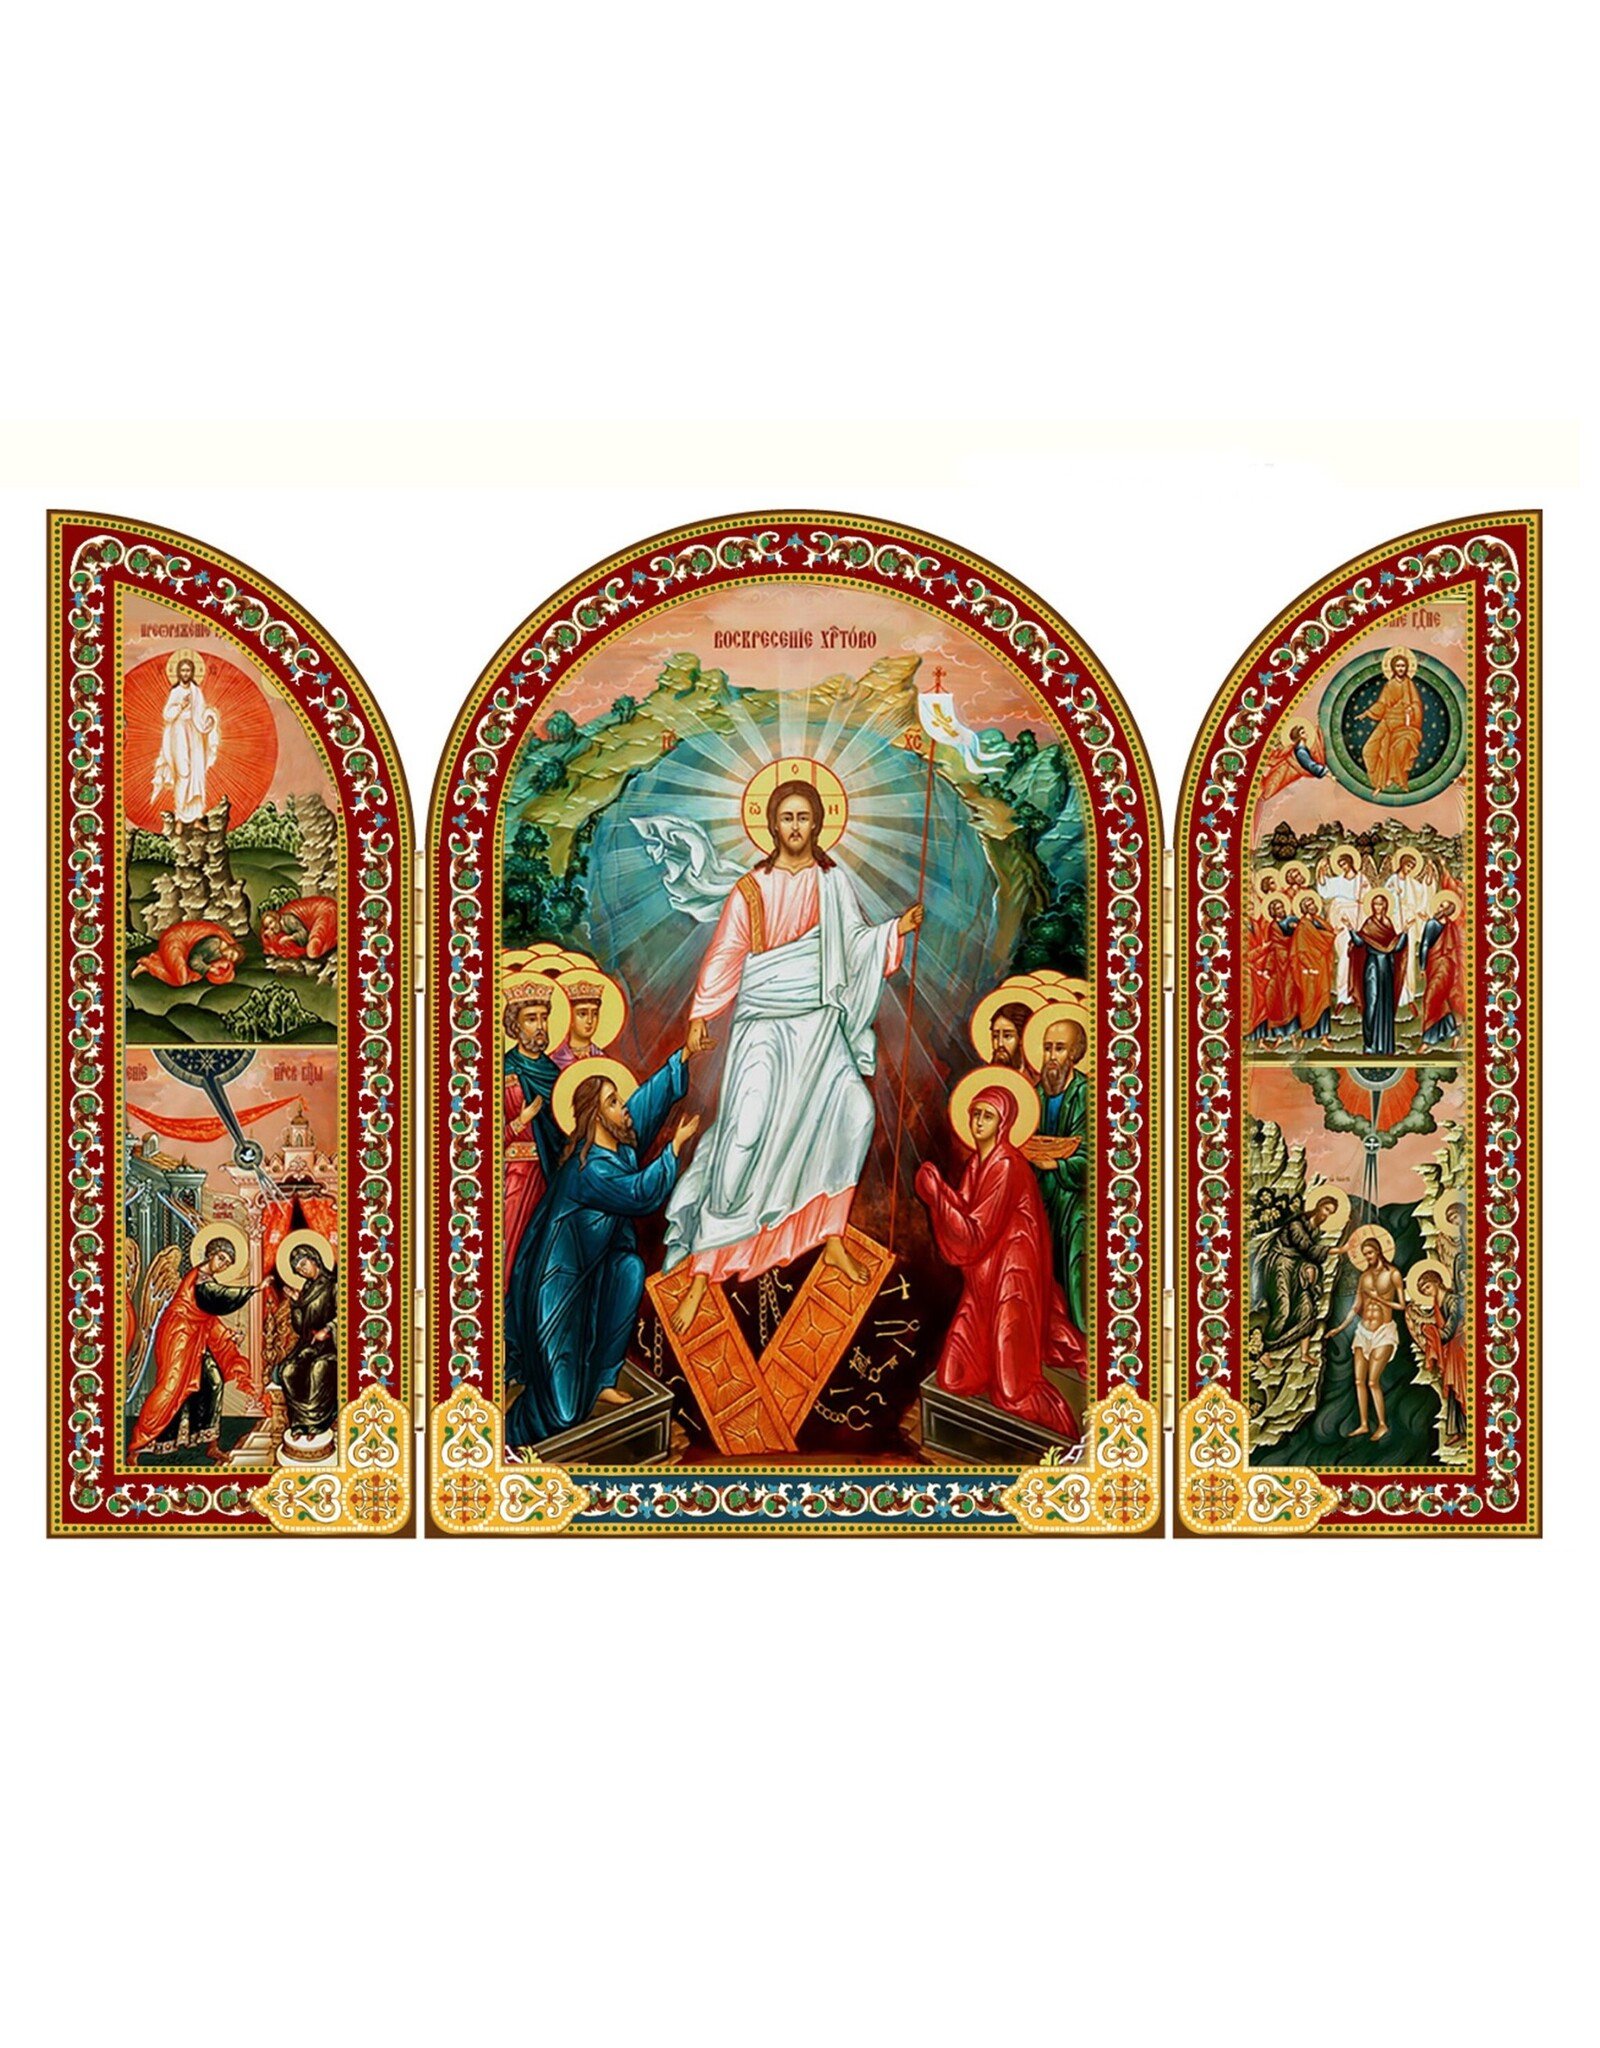 Resurrection of Christ - On The Doors Feast Days of Christ - Gold Foil - Wooden